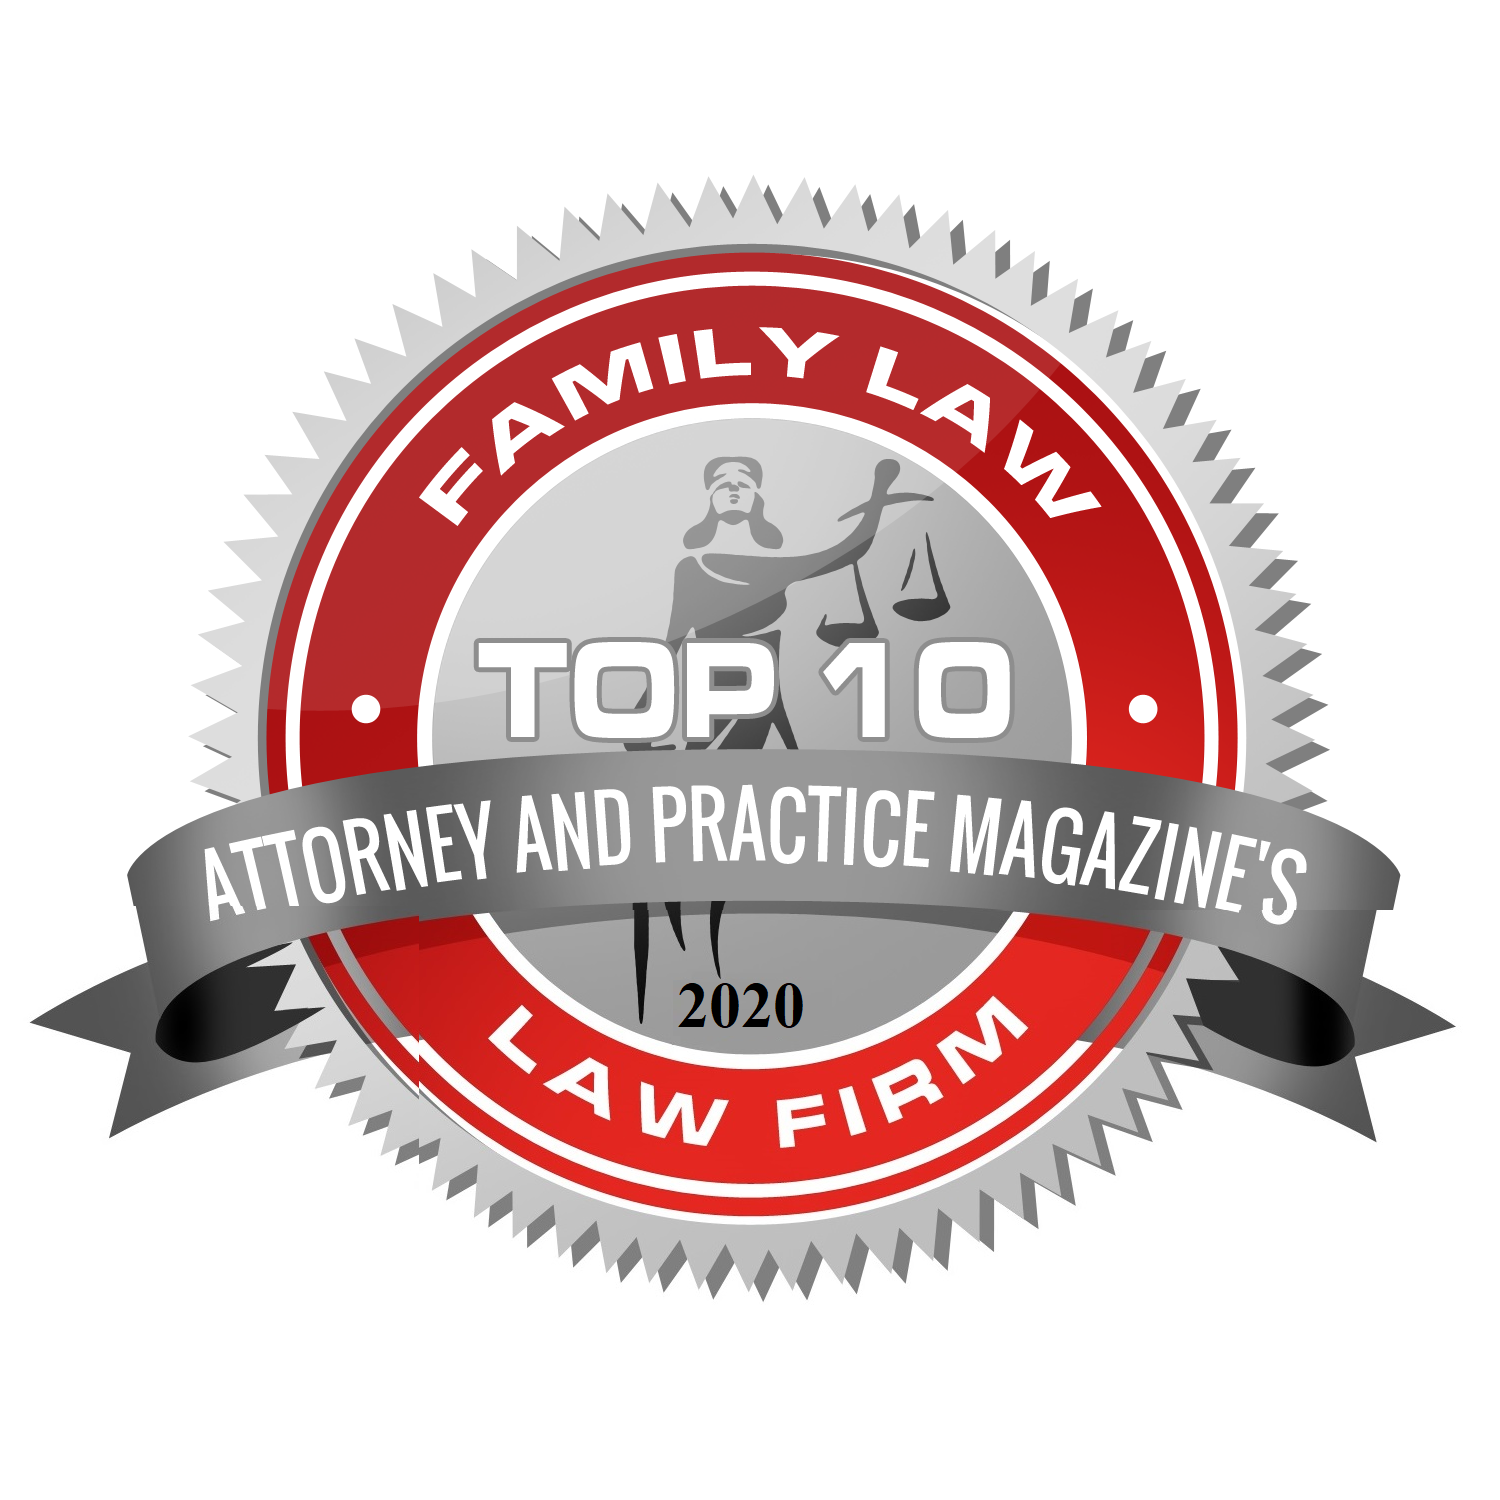 Attorney and Practice Magazine - 2020 Top 10 Family Law Law Firm